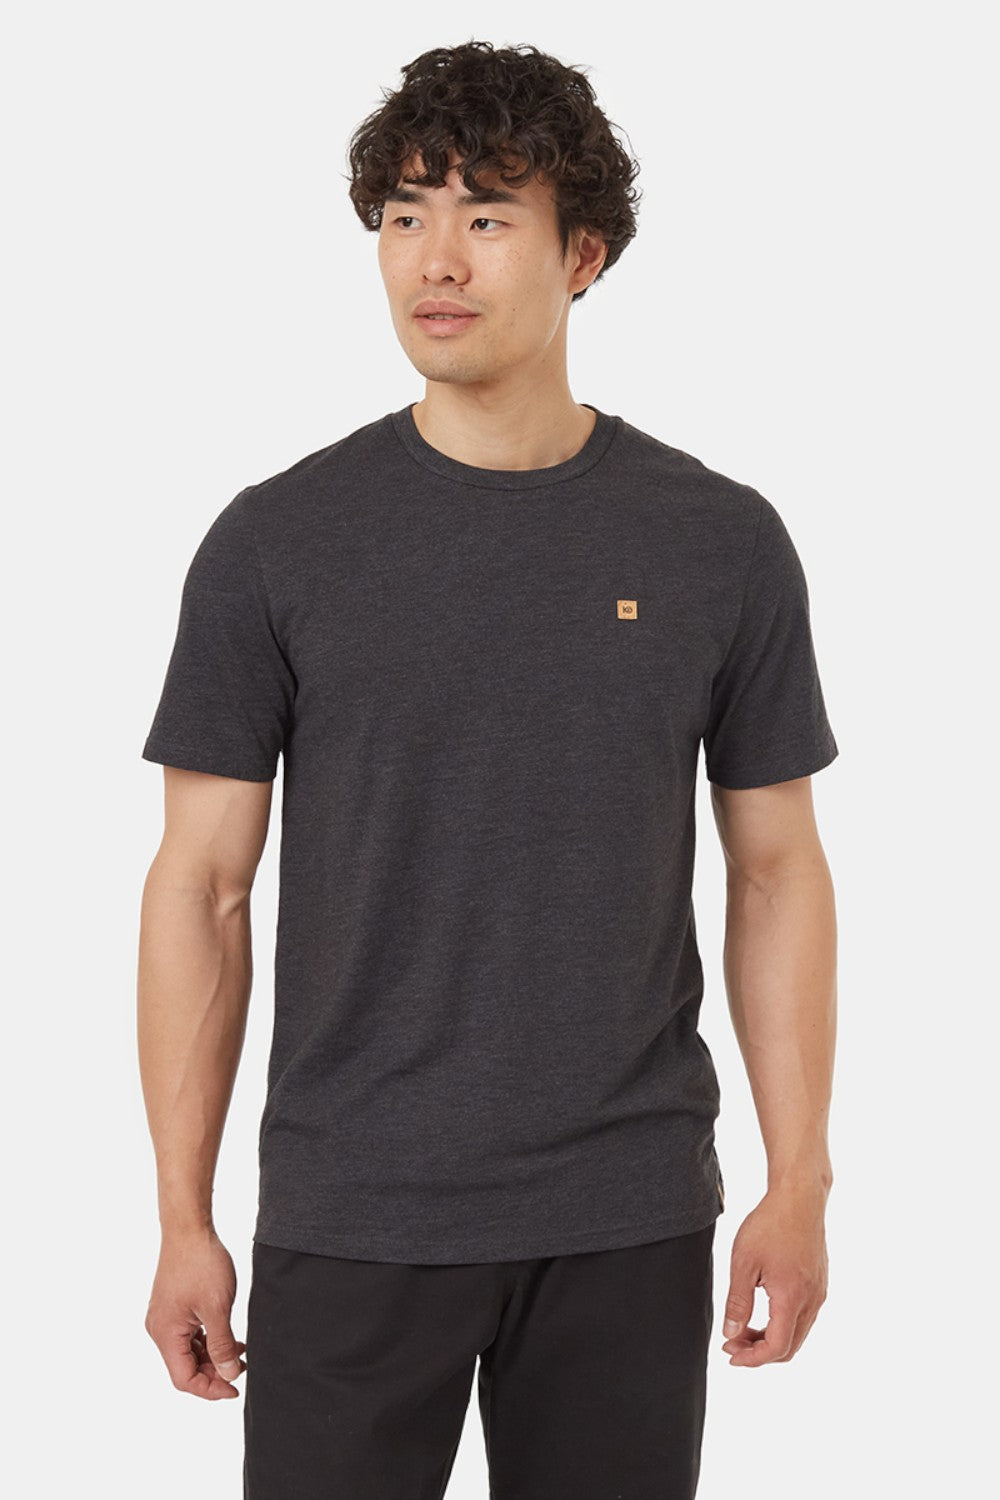 What can we say about this earth-friendly tee that it doesn't already say itself? This classic, straightforward piece is a sustainable staple for any wardrobe.